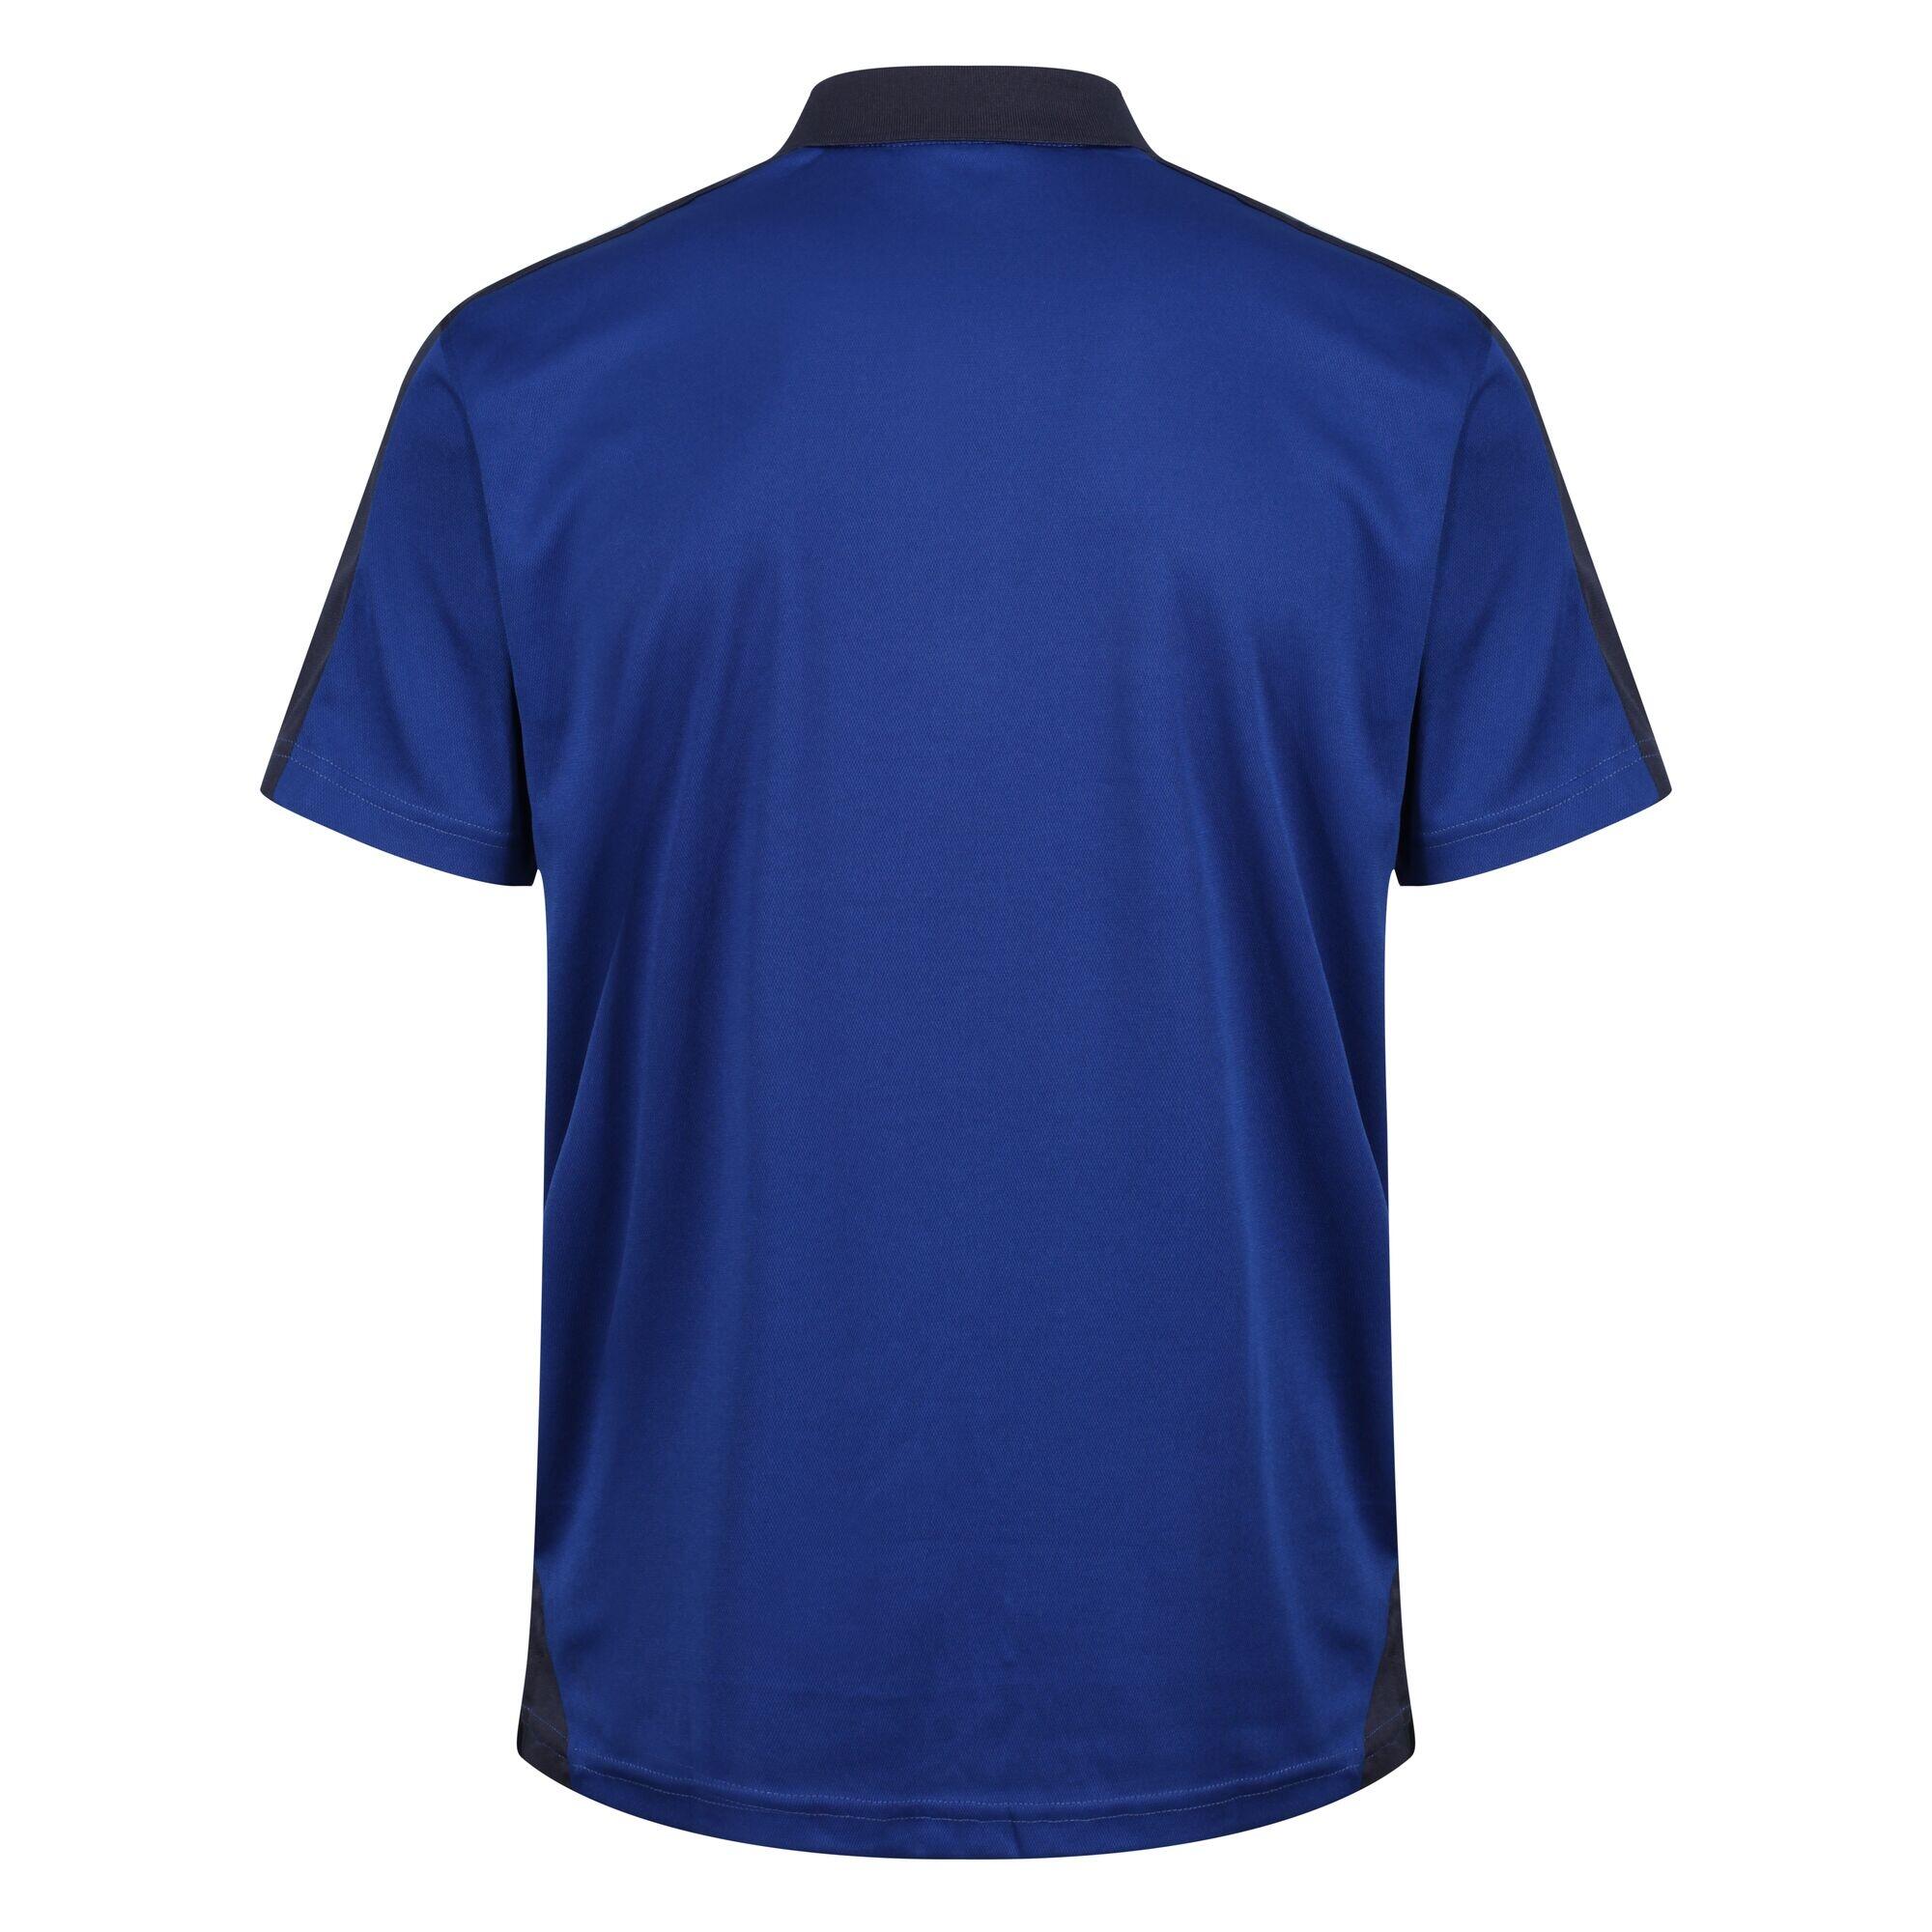 Contrast Coolweave Pique Polo Shirt (New Royal/Navy) 2/3